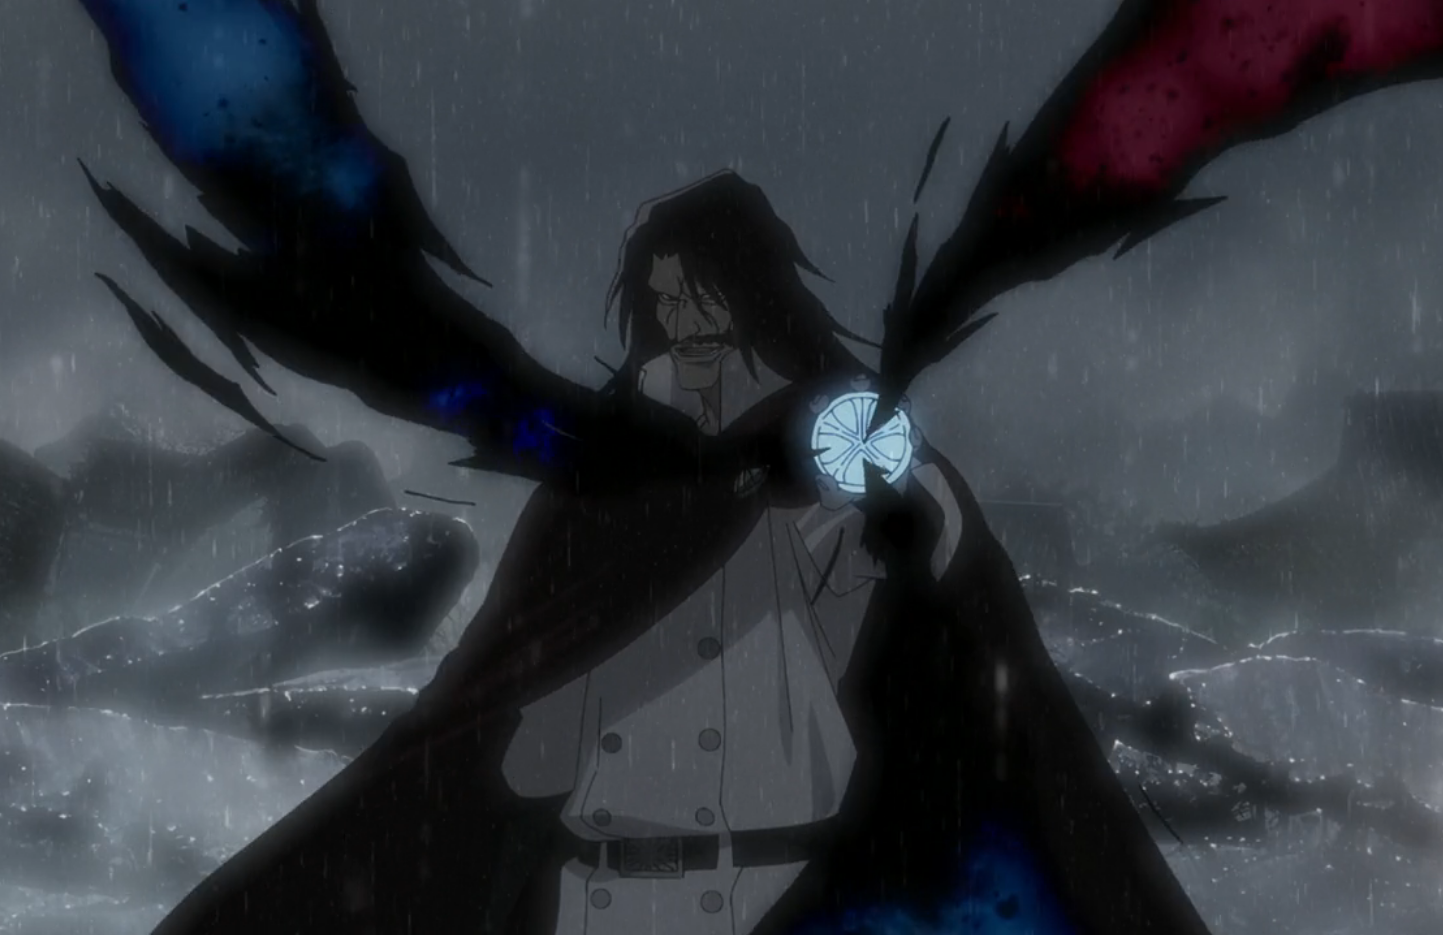 Bleach TYBW episode 5 release time confirmed for 'Wrath as a